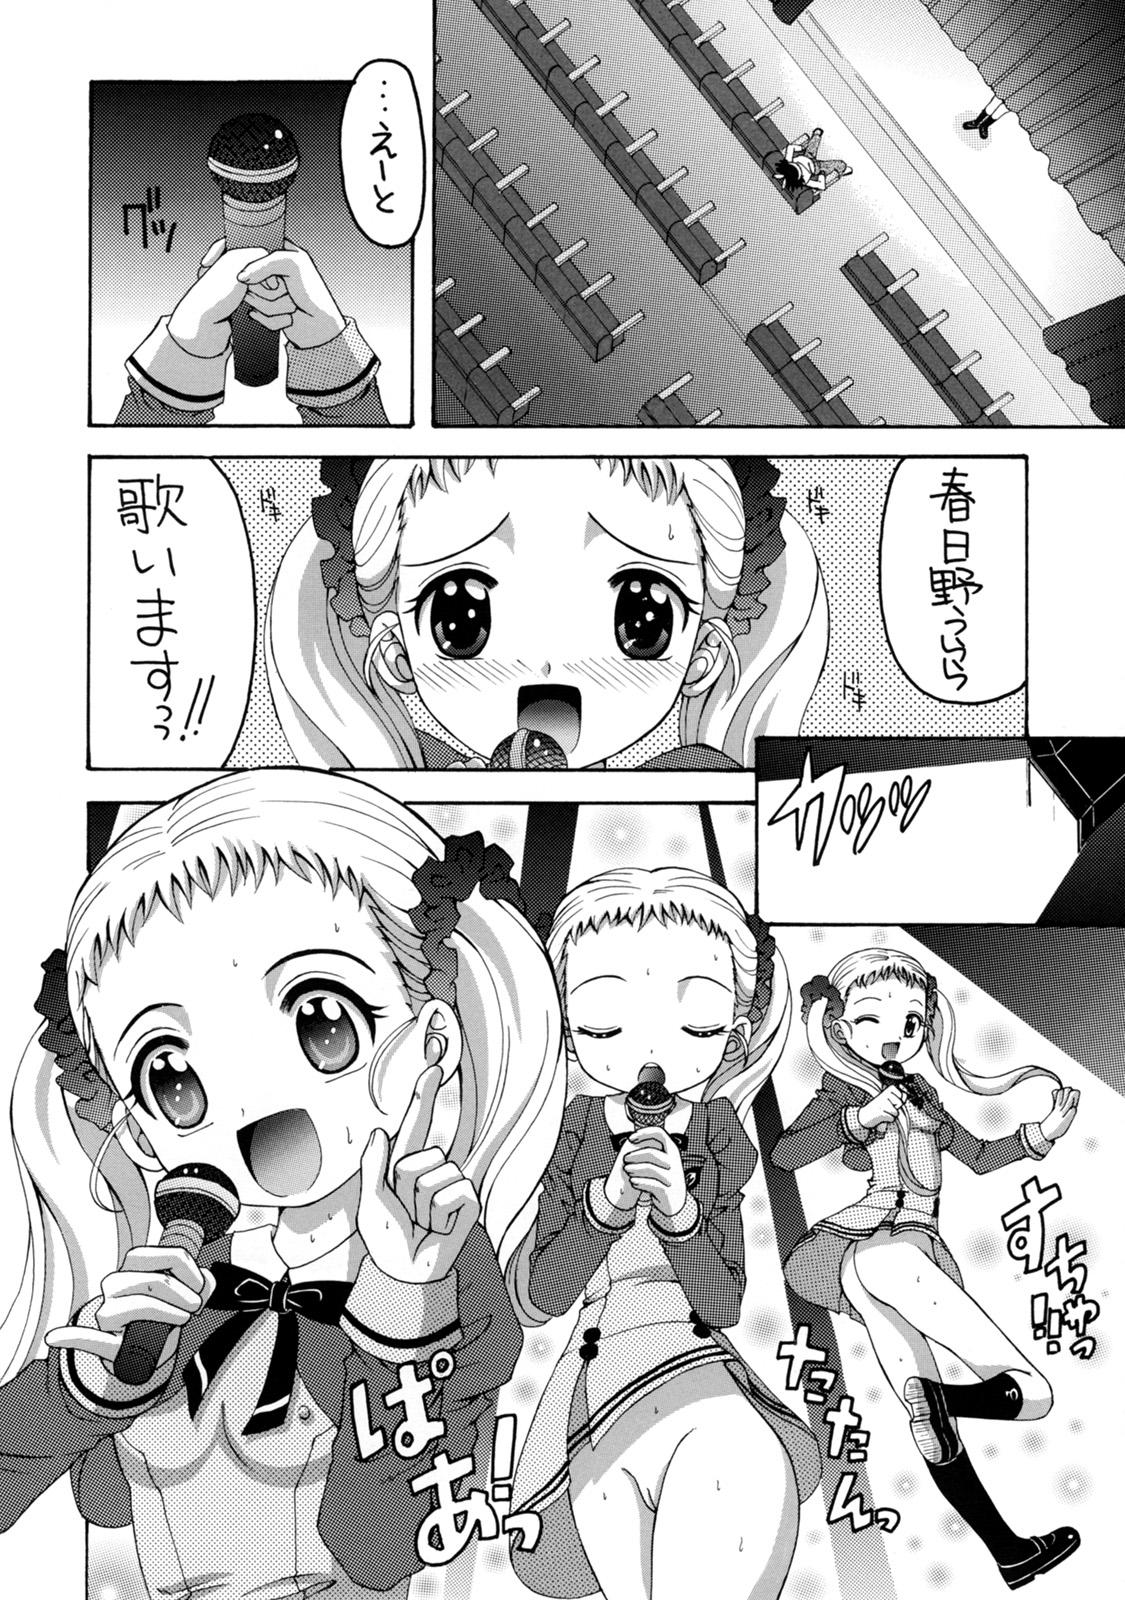 Chaturbate Yes! Five 3 - Pretty cure Yes precure 5 Master - Page 3